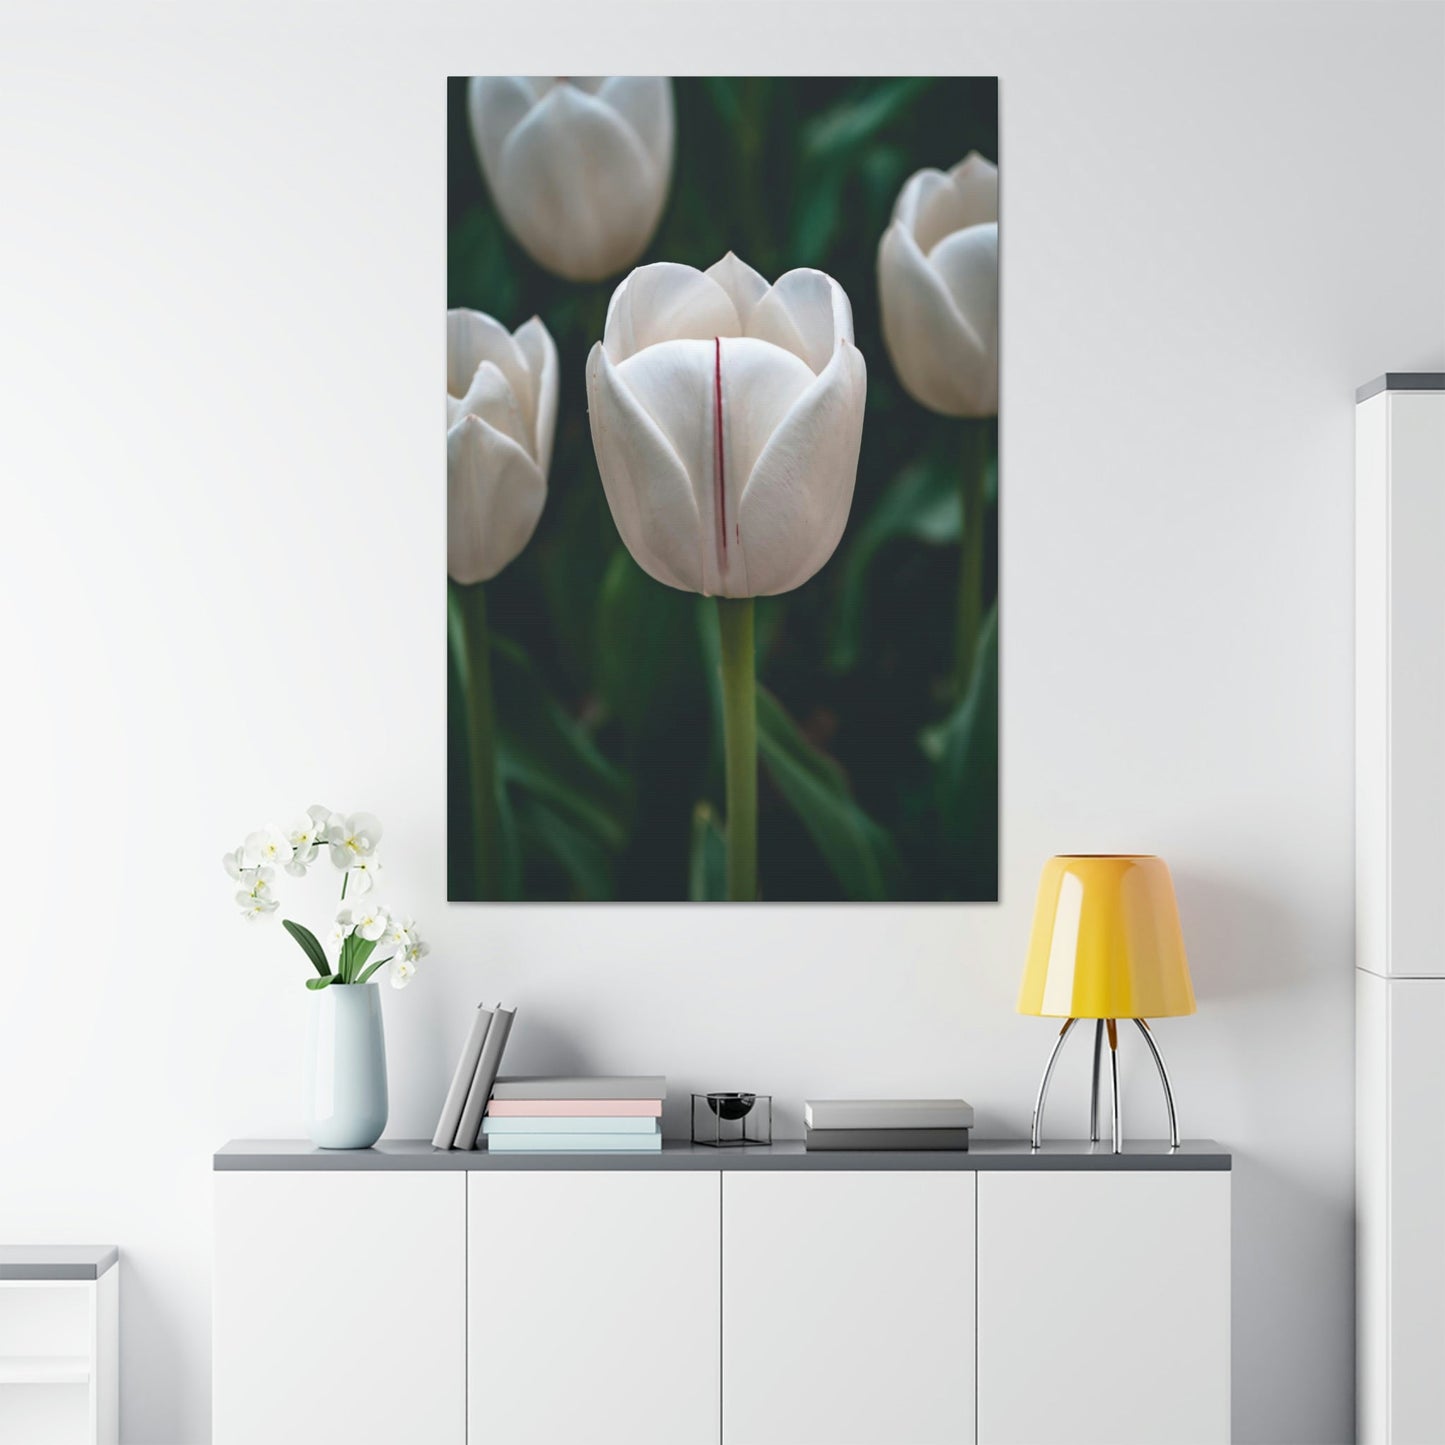 Blooming Tulips: A Springtime Bouquet